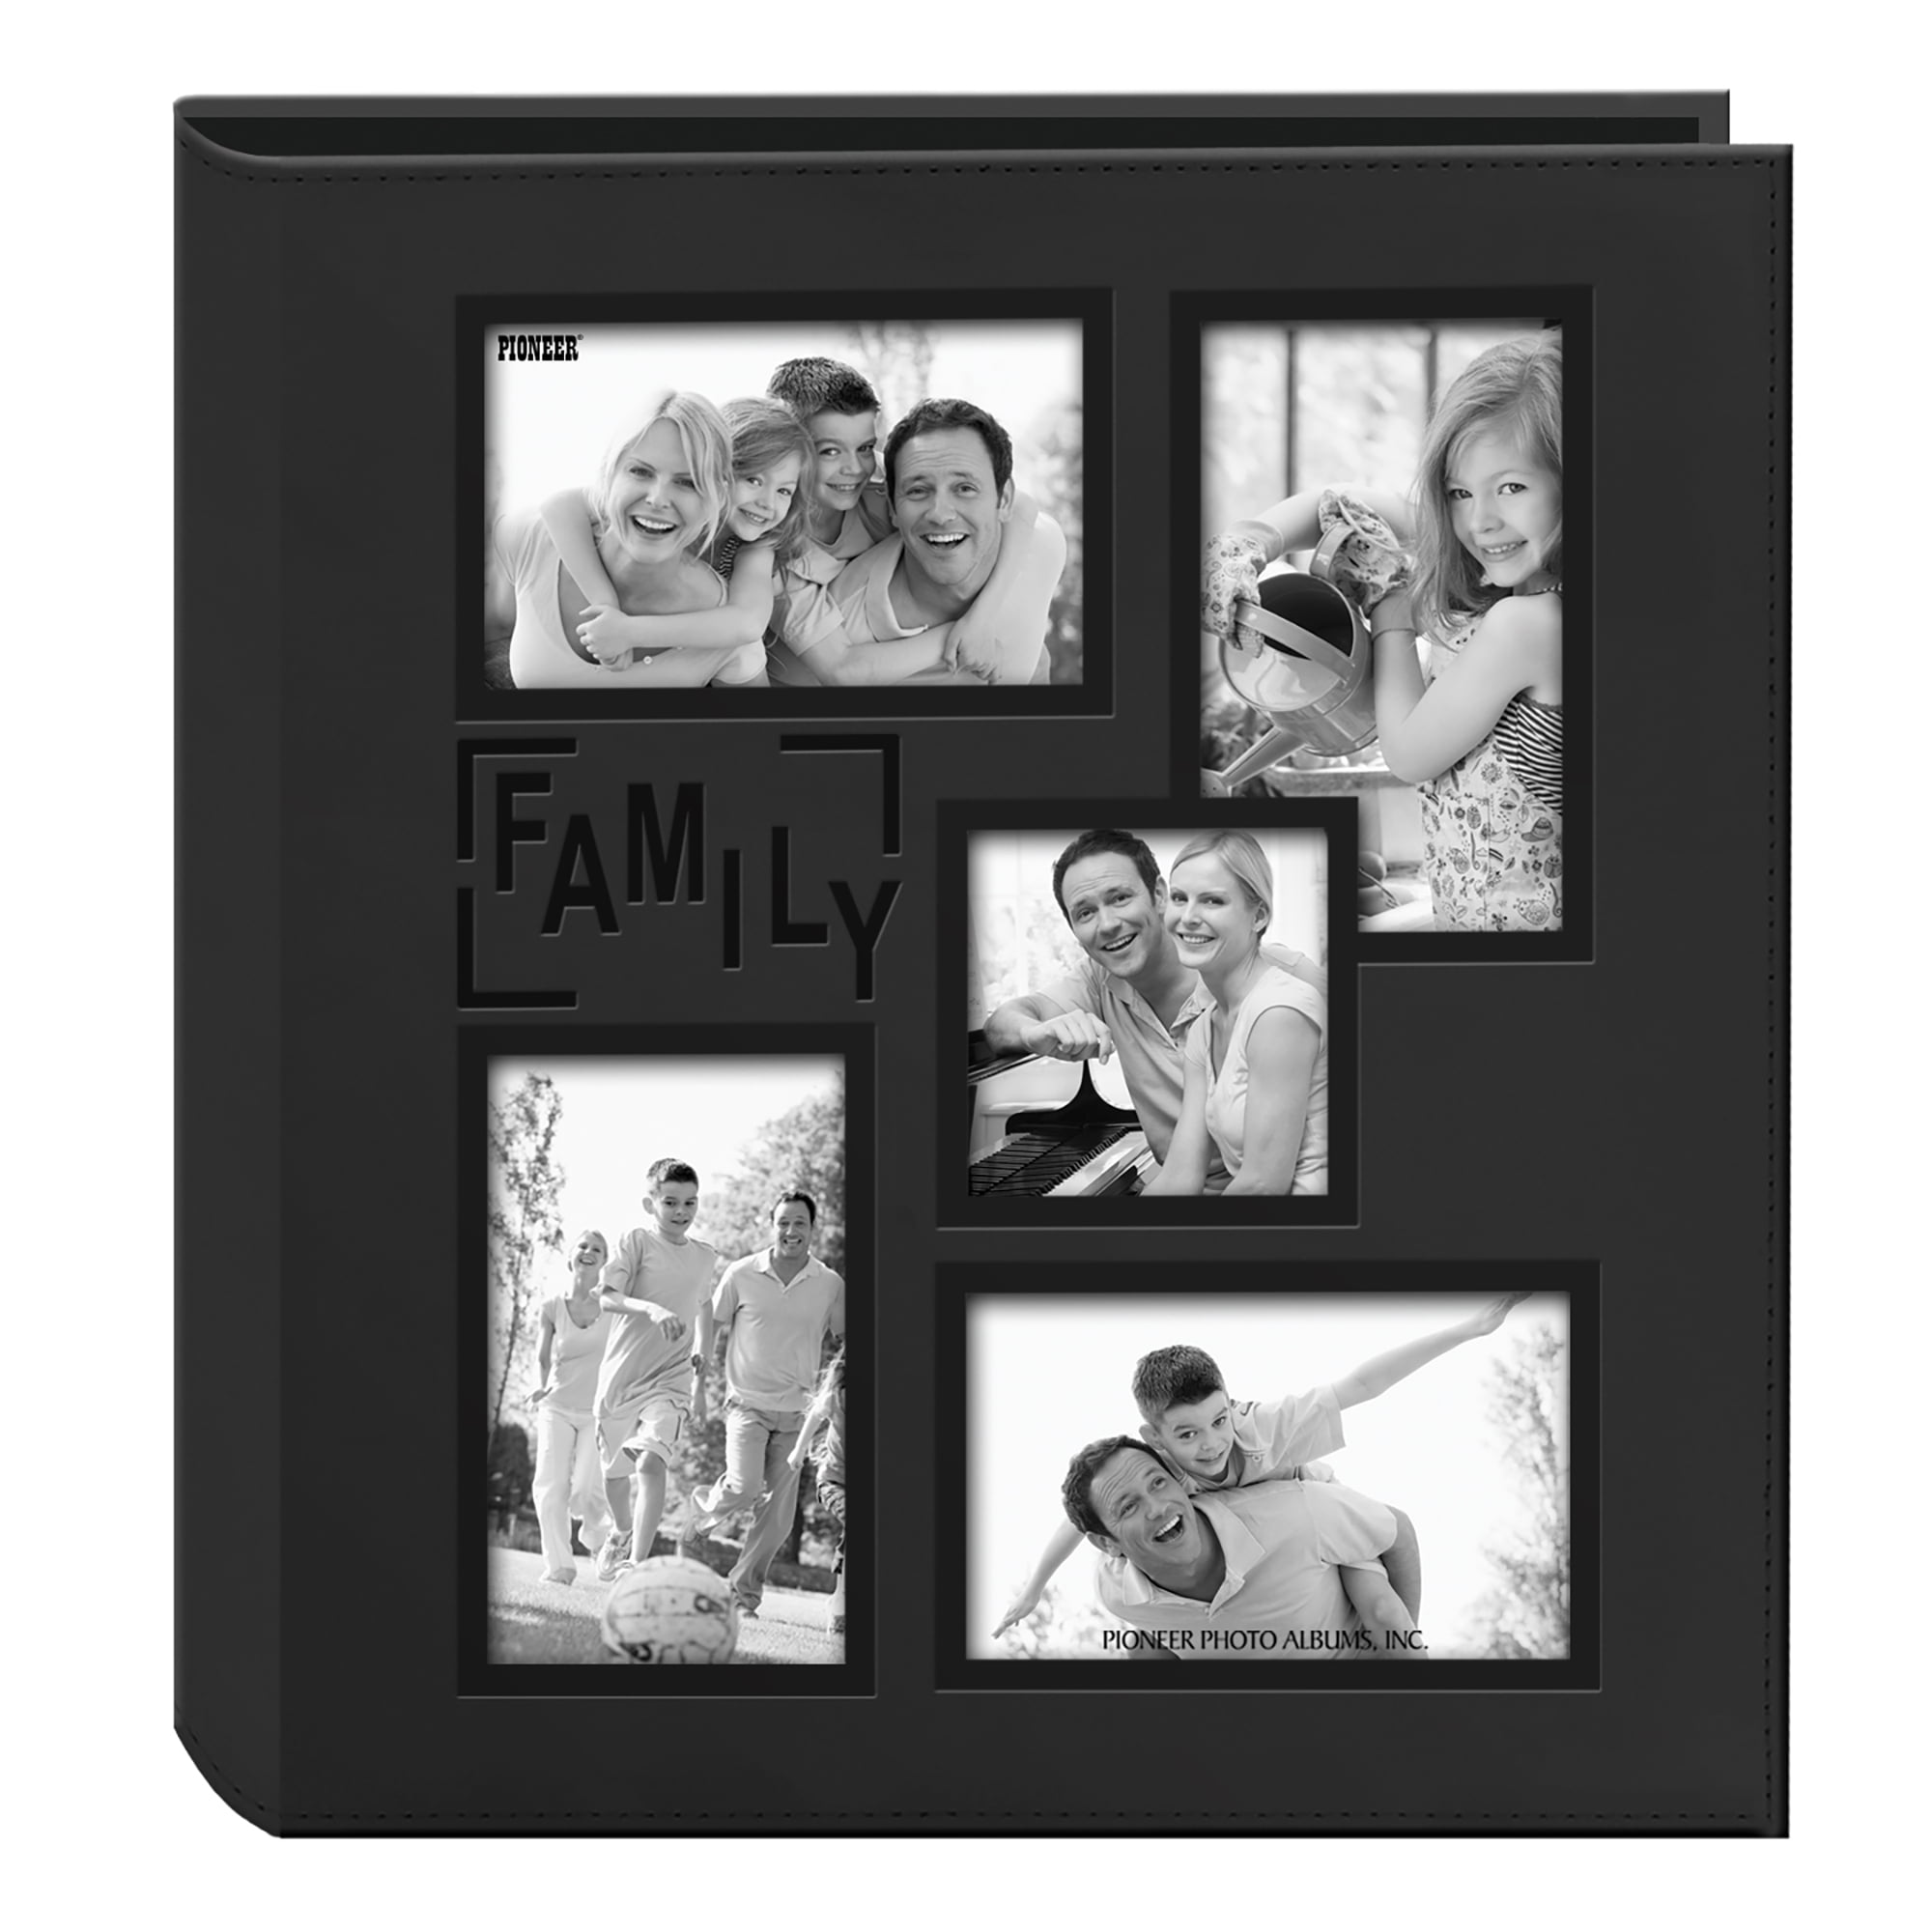 BESPORTBLE Photo Album 4x6 Inches Family Child Baby Photo Interstitial Albums Holds 100 Photos 